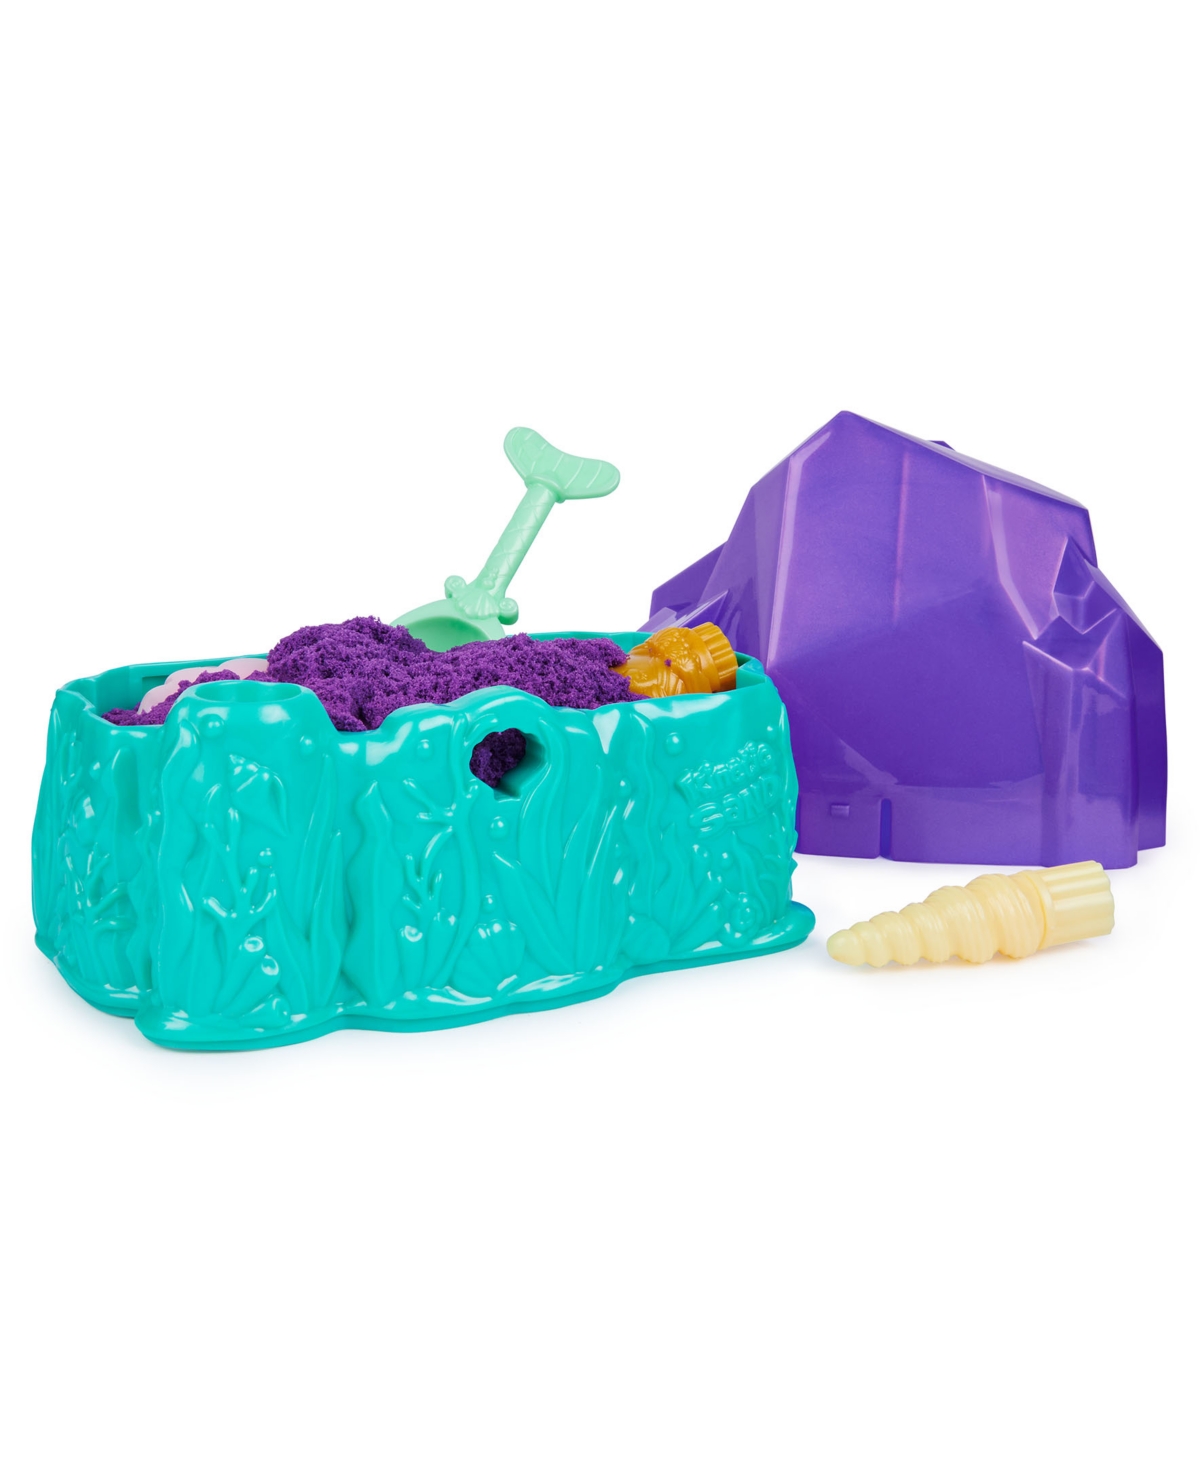 Mermaid Crystal Playset, Gold Shimmer Sand, Storage and Tools - Multi-color